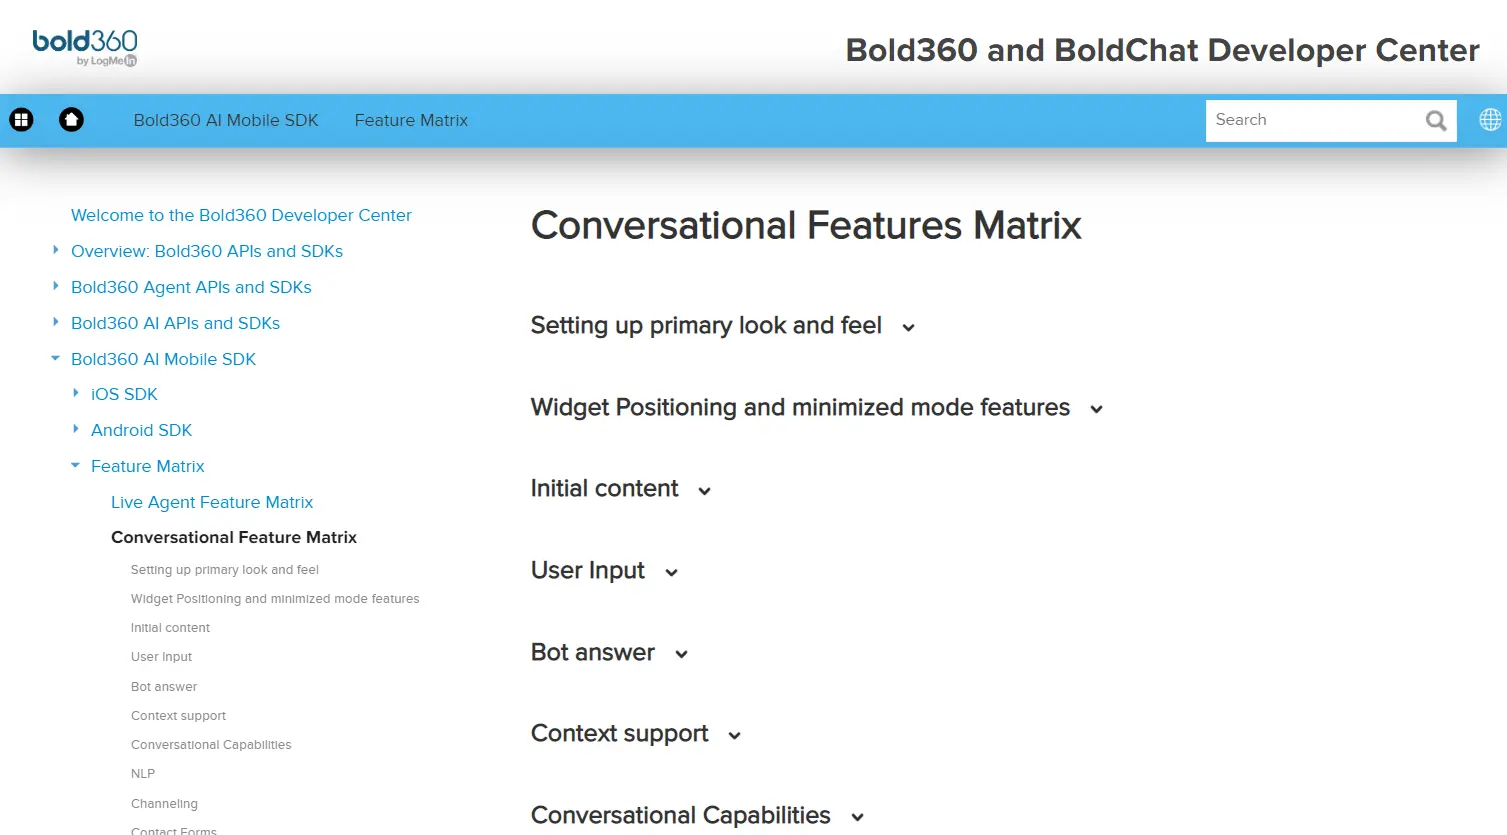 What is Bold360?